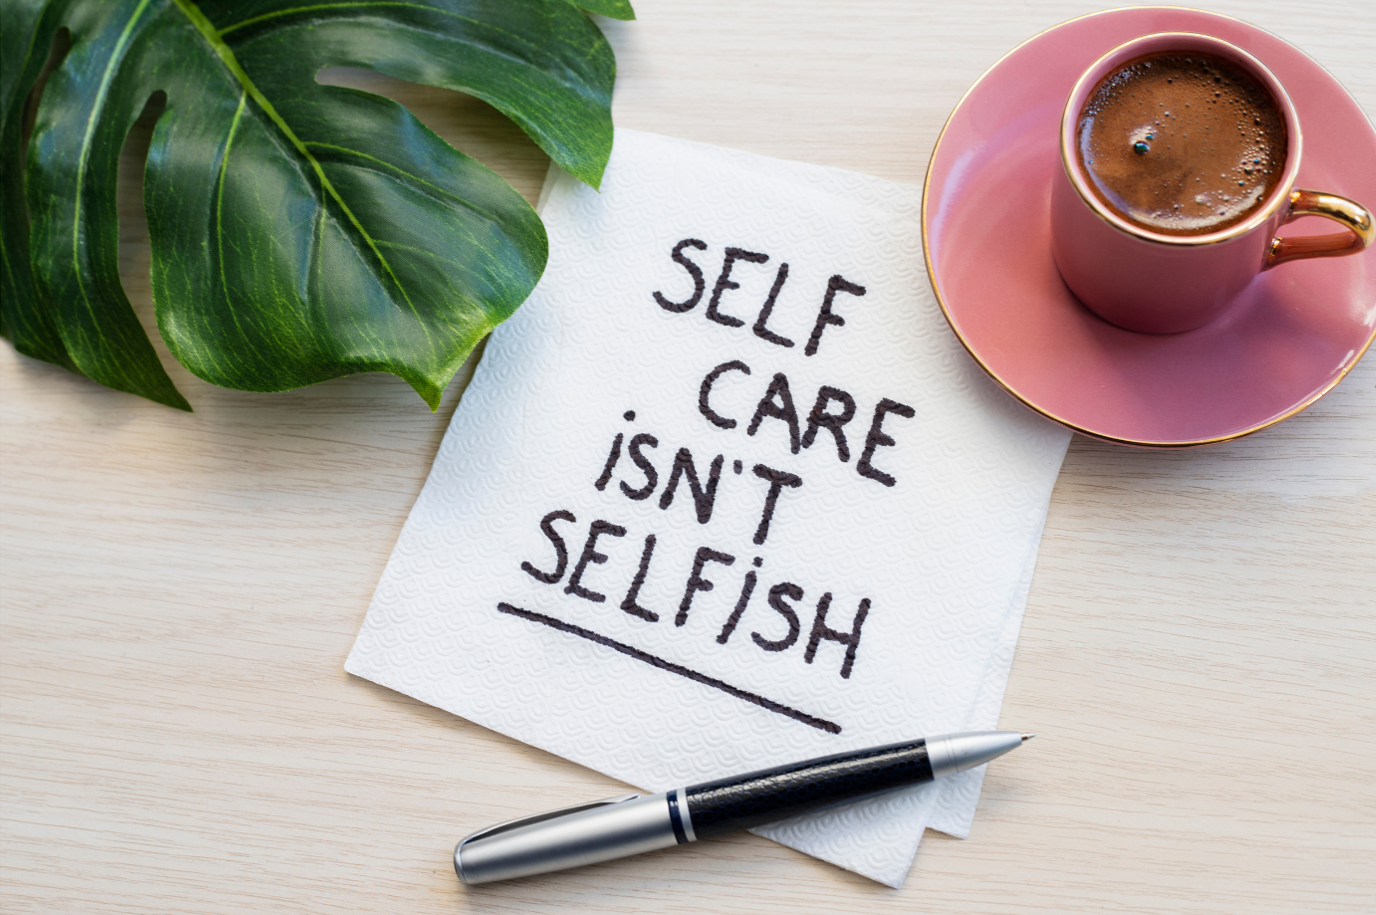 Self-care isn't selfish written on tissue paper with a pen, a cup of chocolate, and Monstera leaf.